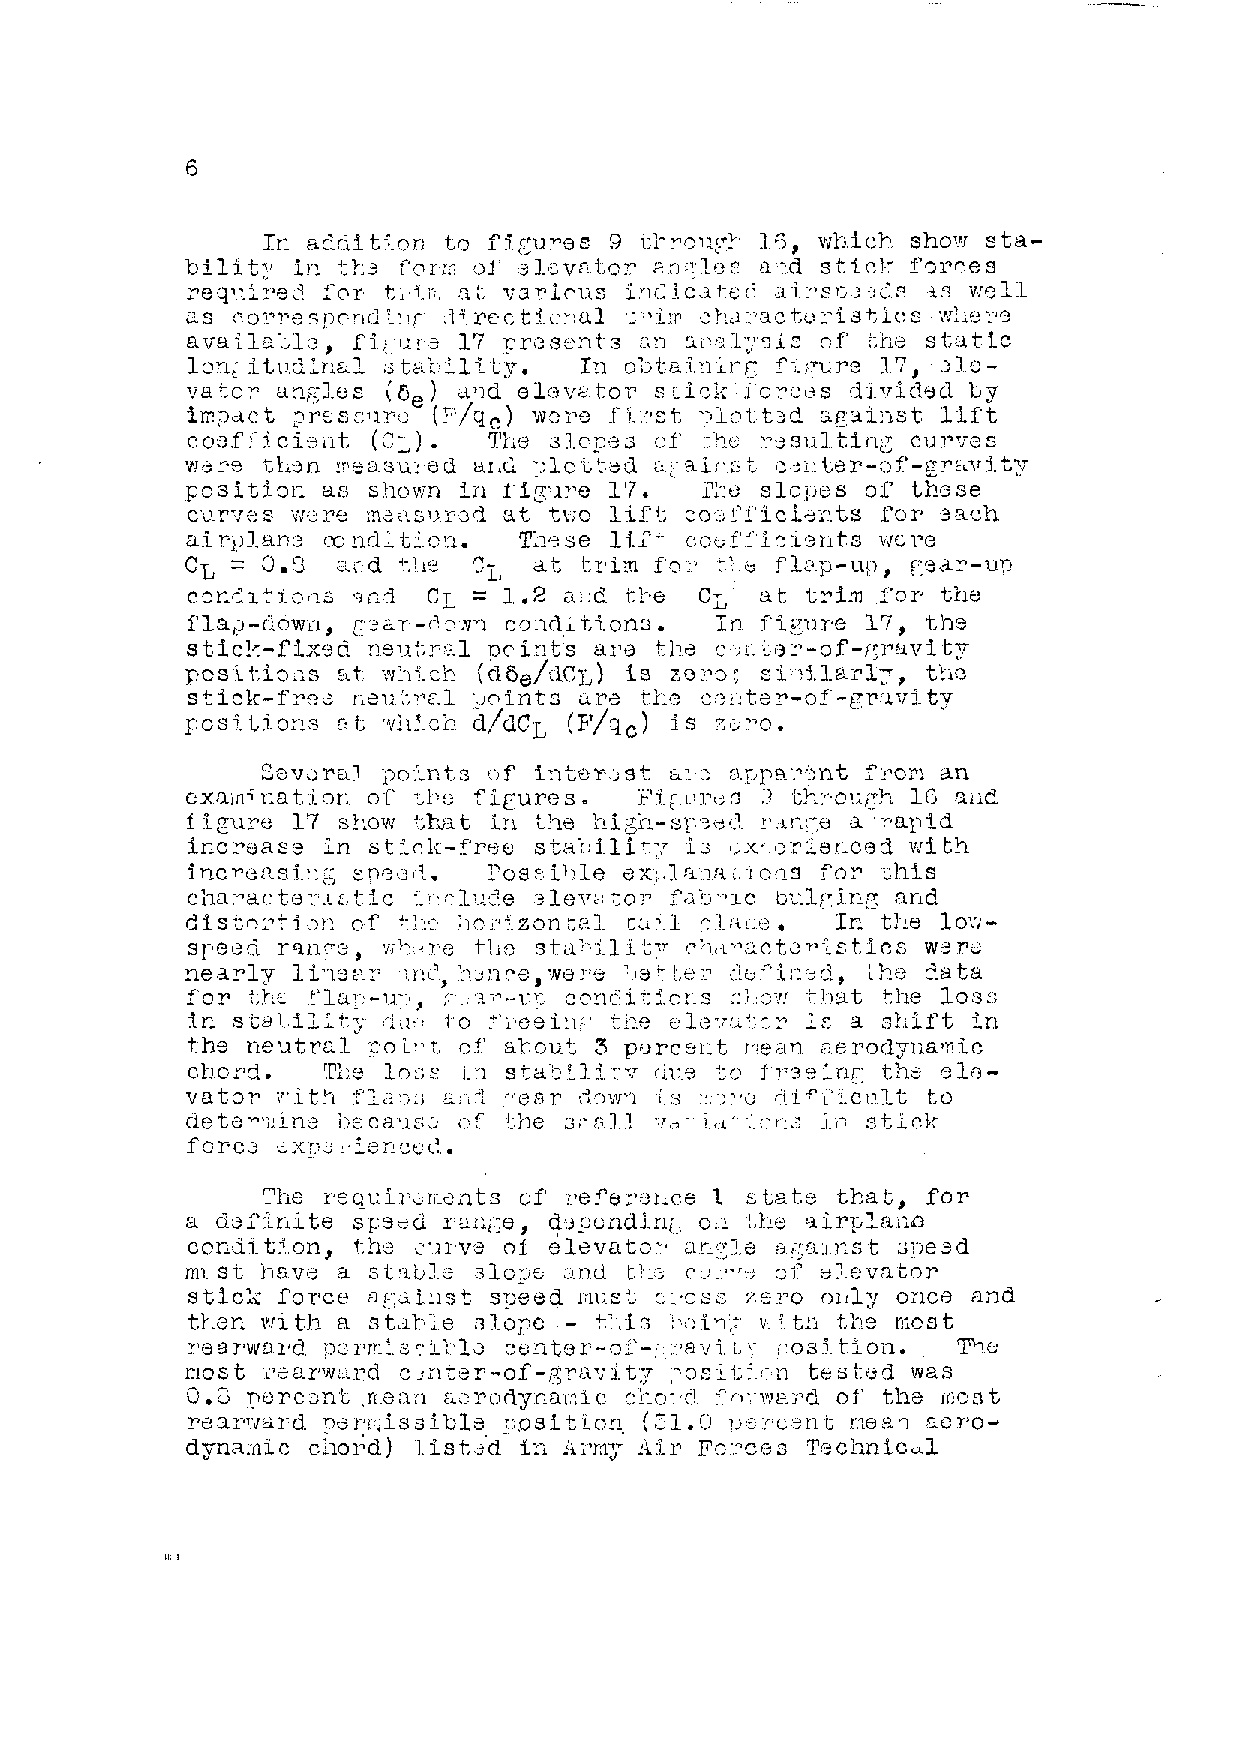 Sample page 6 from AirCorps Library document: Memorandum Report on the Flying Qualities of the Bell P-39D-1